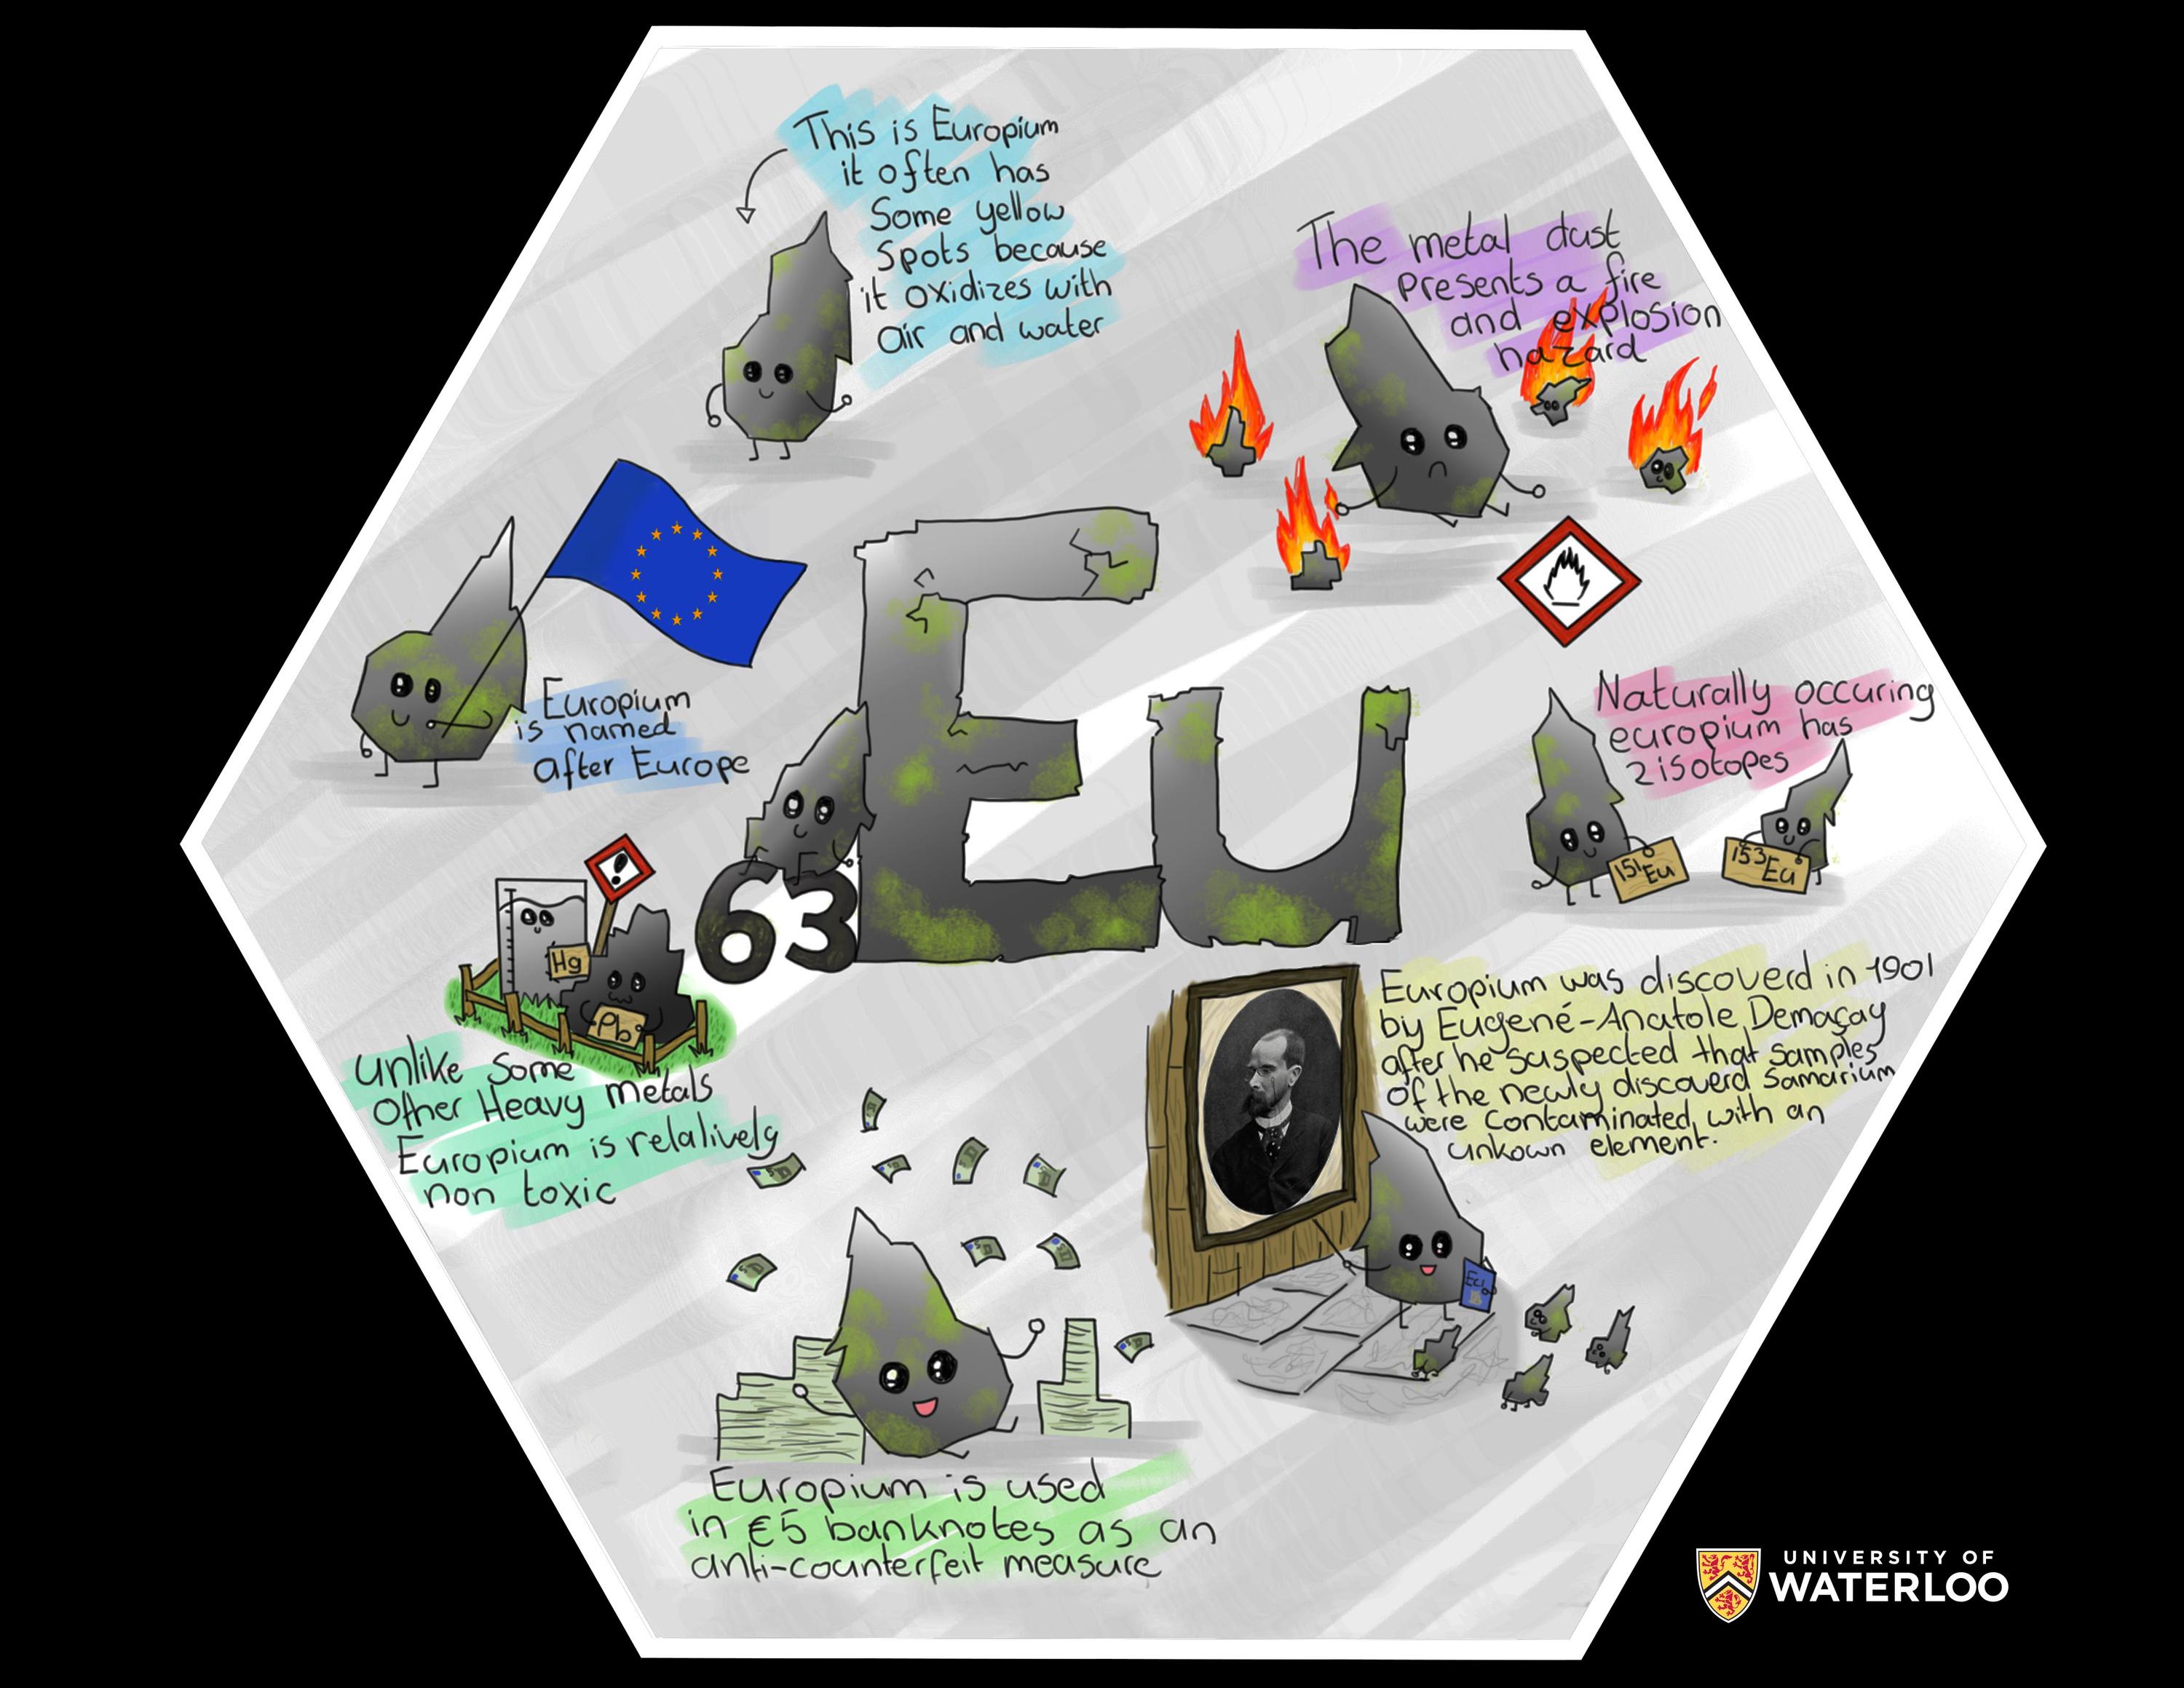 Pen and ink plus digital additions on white background. Chemical symbol “Eu” is centre written in fracturing concrete lettering. Surrounding are facts about Europium featuring a little rock mascot. Text in the image. 1. Europium is named after Europe. 2. This is Europium. It often has some yellow spots because it oxidizes with oil and water. 3. The metal dust presents a fire and explosion hazard. 4. Naturally occurring europium has 2 isotopes. 5. Europium was discovered in 1901 by Eugené-Anatole Demoçay aft